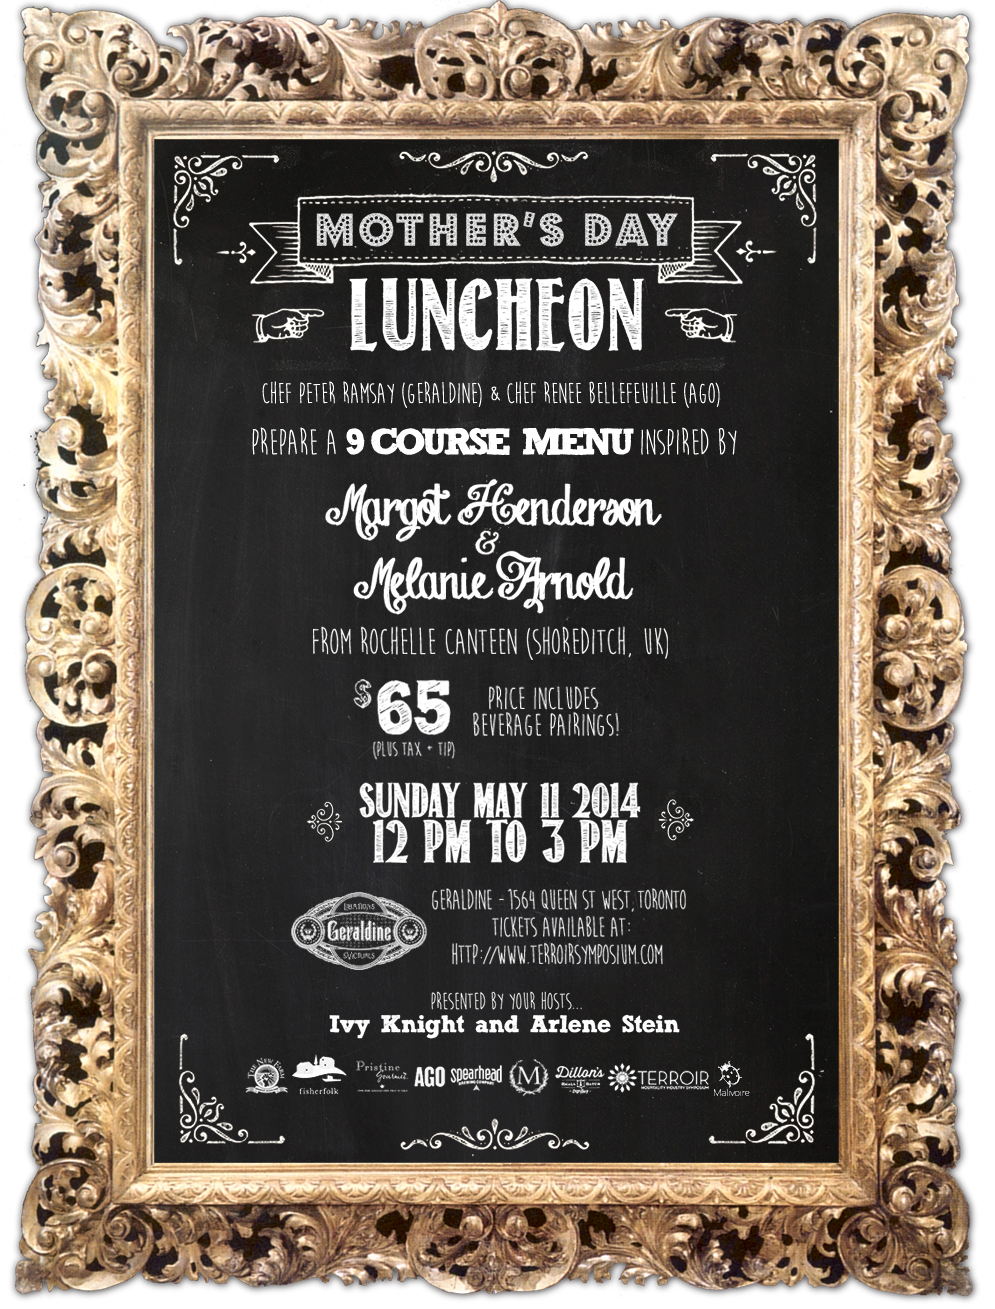 MothersDayLunch_Poster